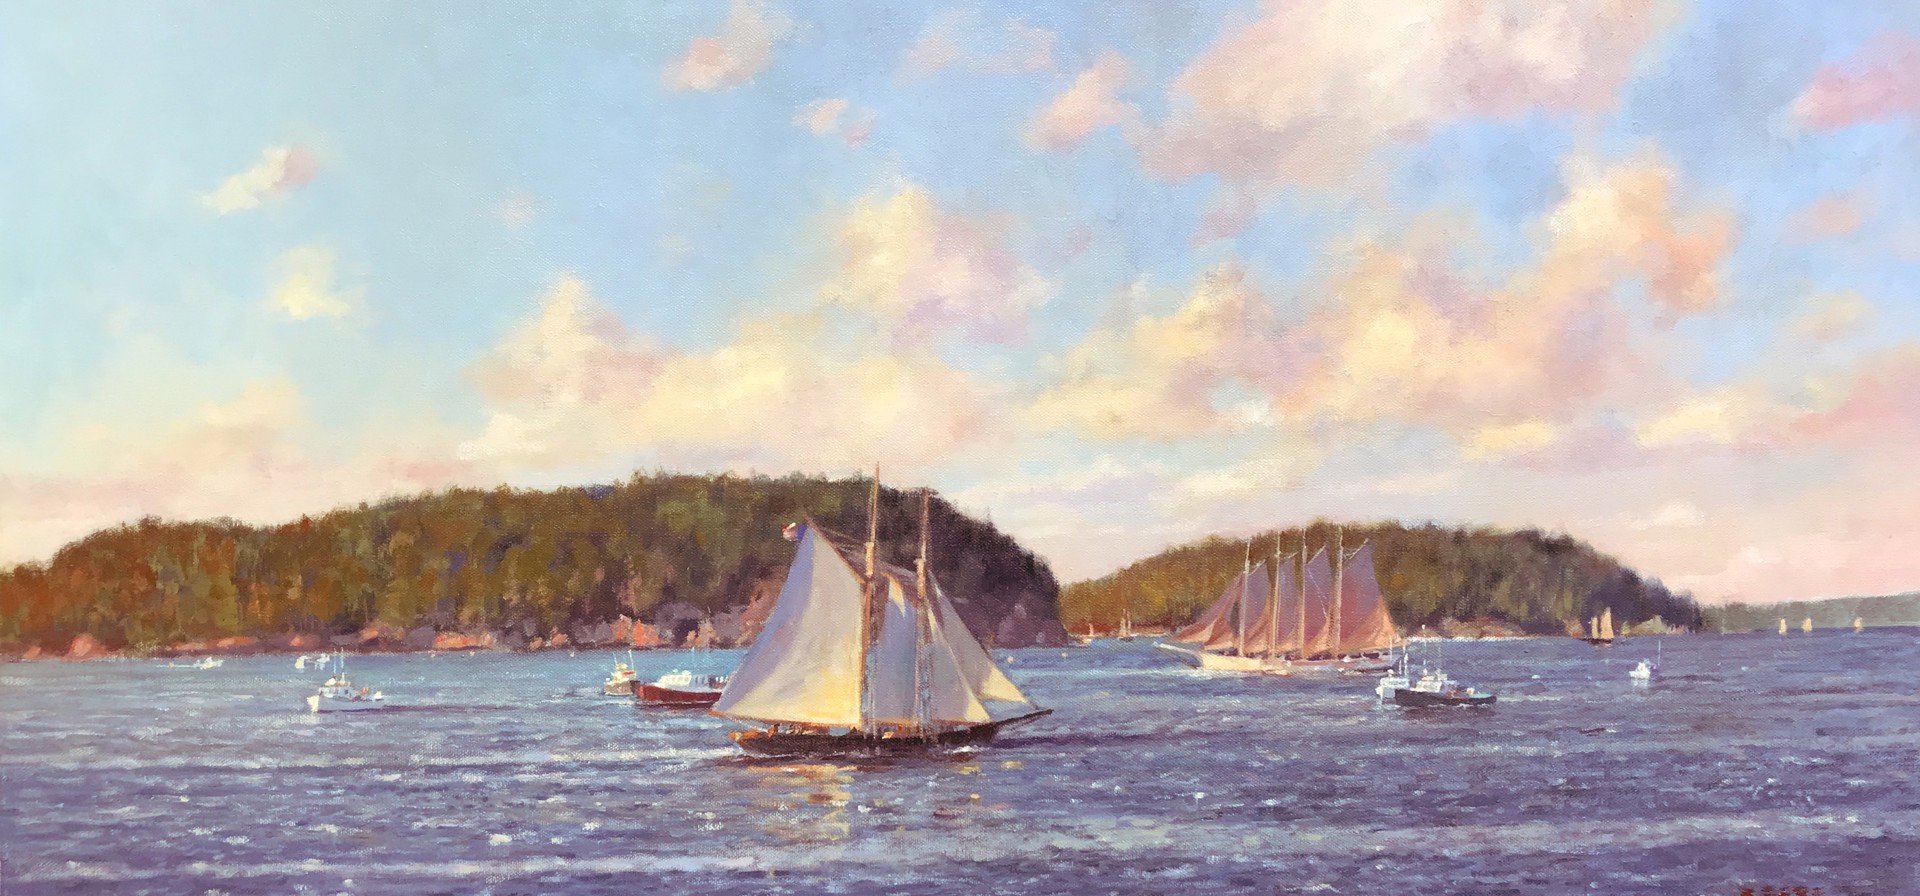 Afternoon Light, Bar Harbor by Paul Beebe